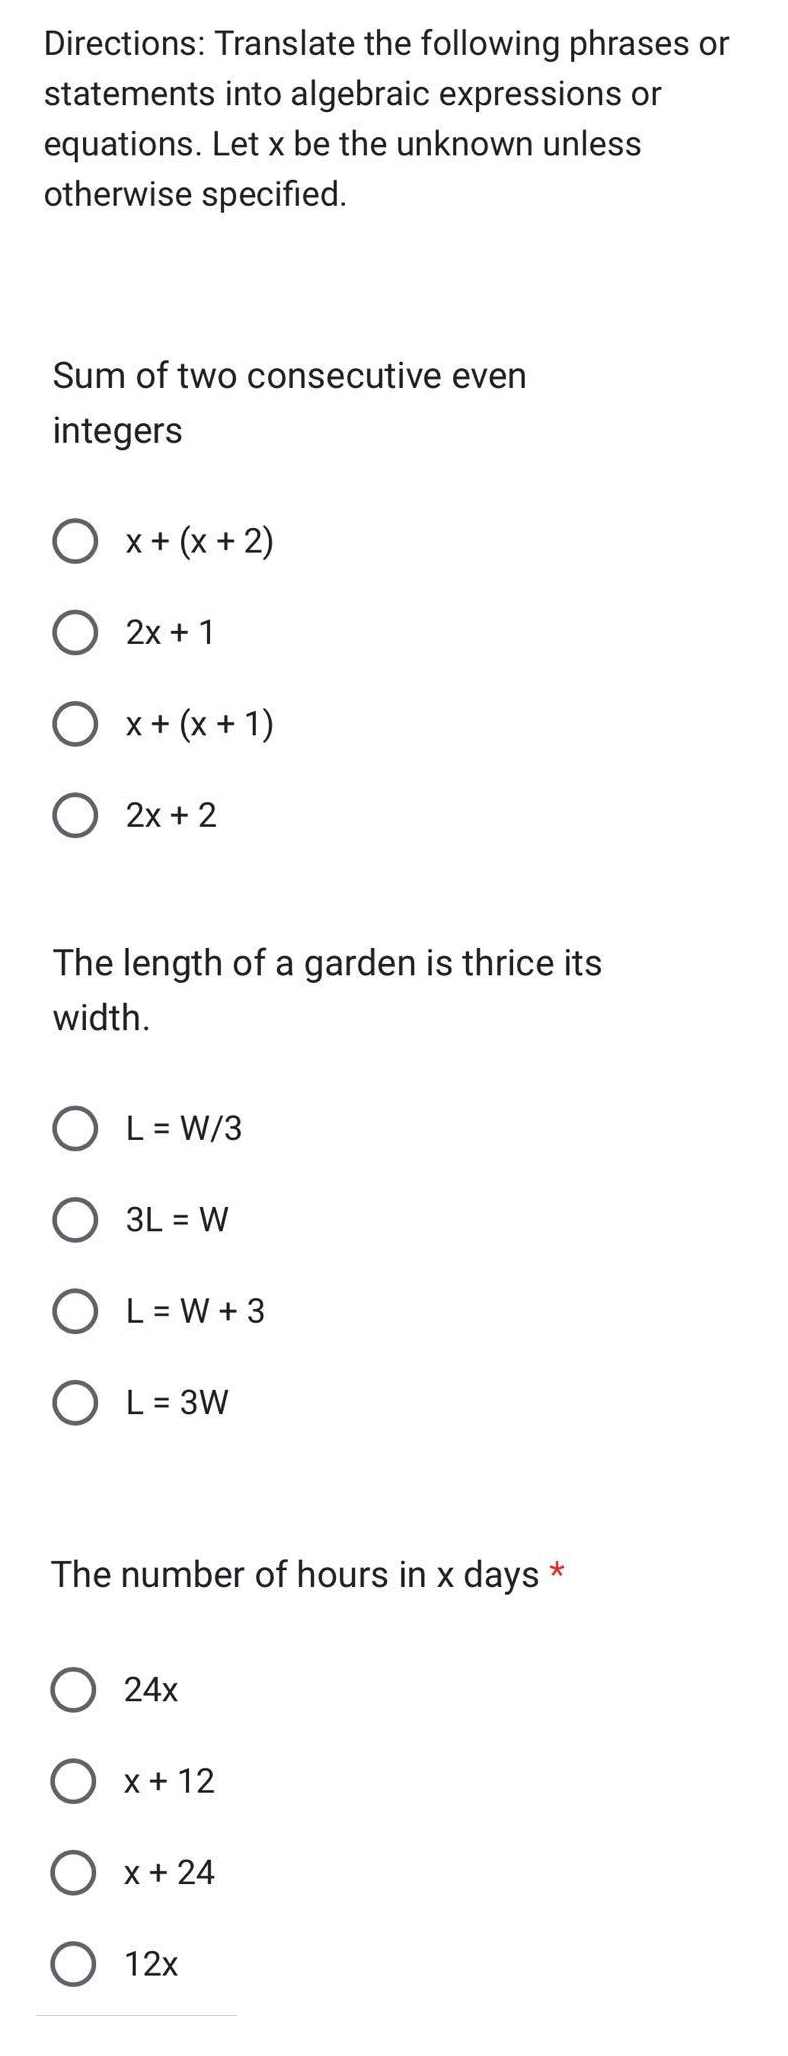 Directions: Translate the following phrases or
statements into algebraic expressions or
equations. Let x be the unknown unless
otherwise specified.
Sum of two consecutive even
integers
X + (x + 2)
O 2x + 1
O x + (x + 1)
O 2x + 2
The length of a garden is thrice its
width.
OL= W/3
O 3L = W
O L=W + 3
O L = 3W
The number of hours in x days
O 24x
O x + 12
O x + 24
O 12x